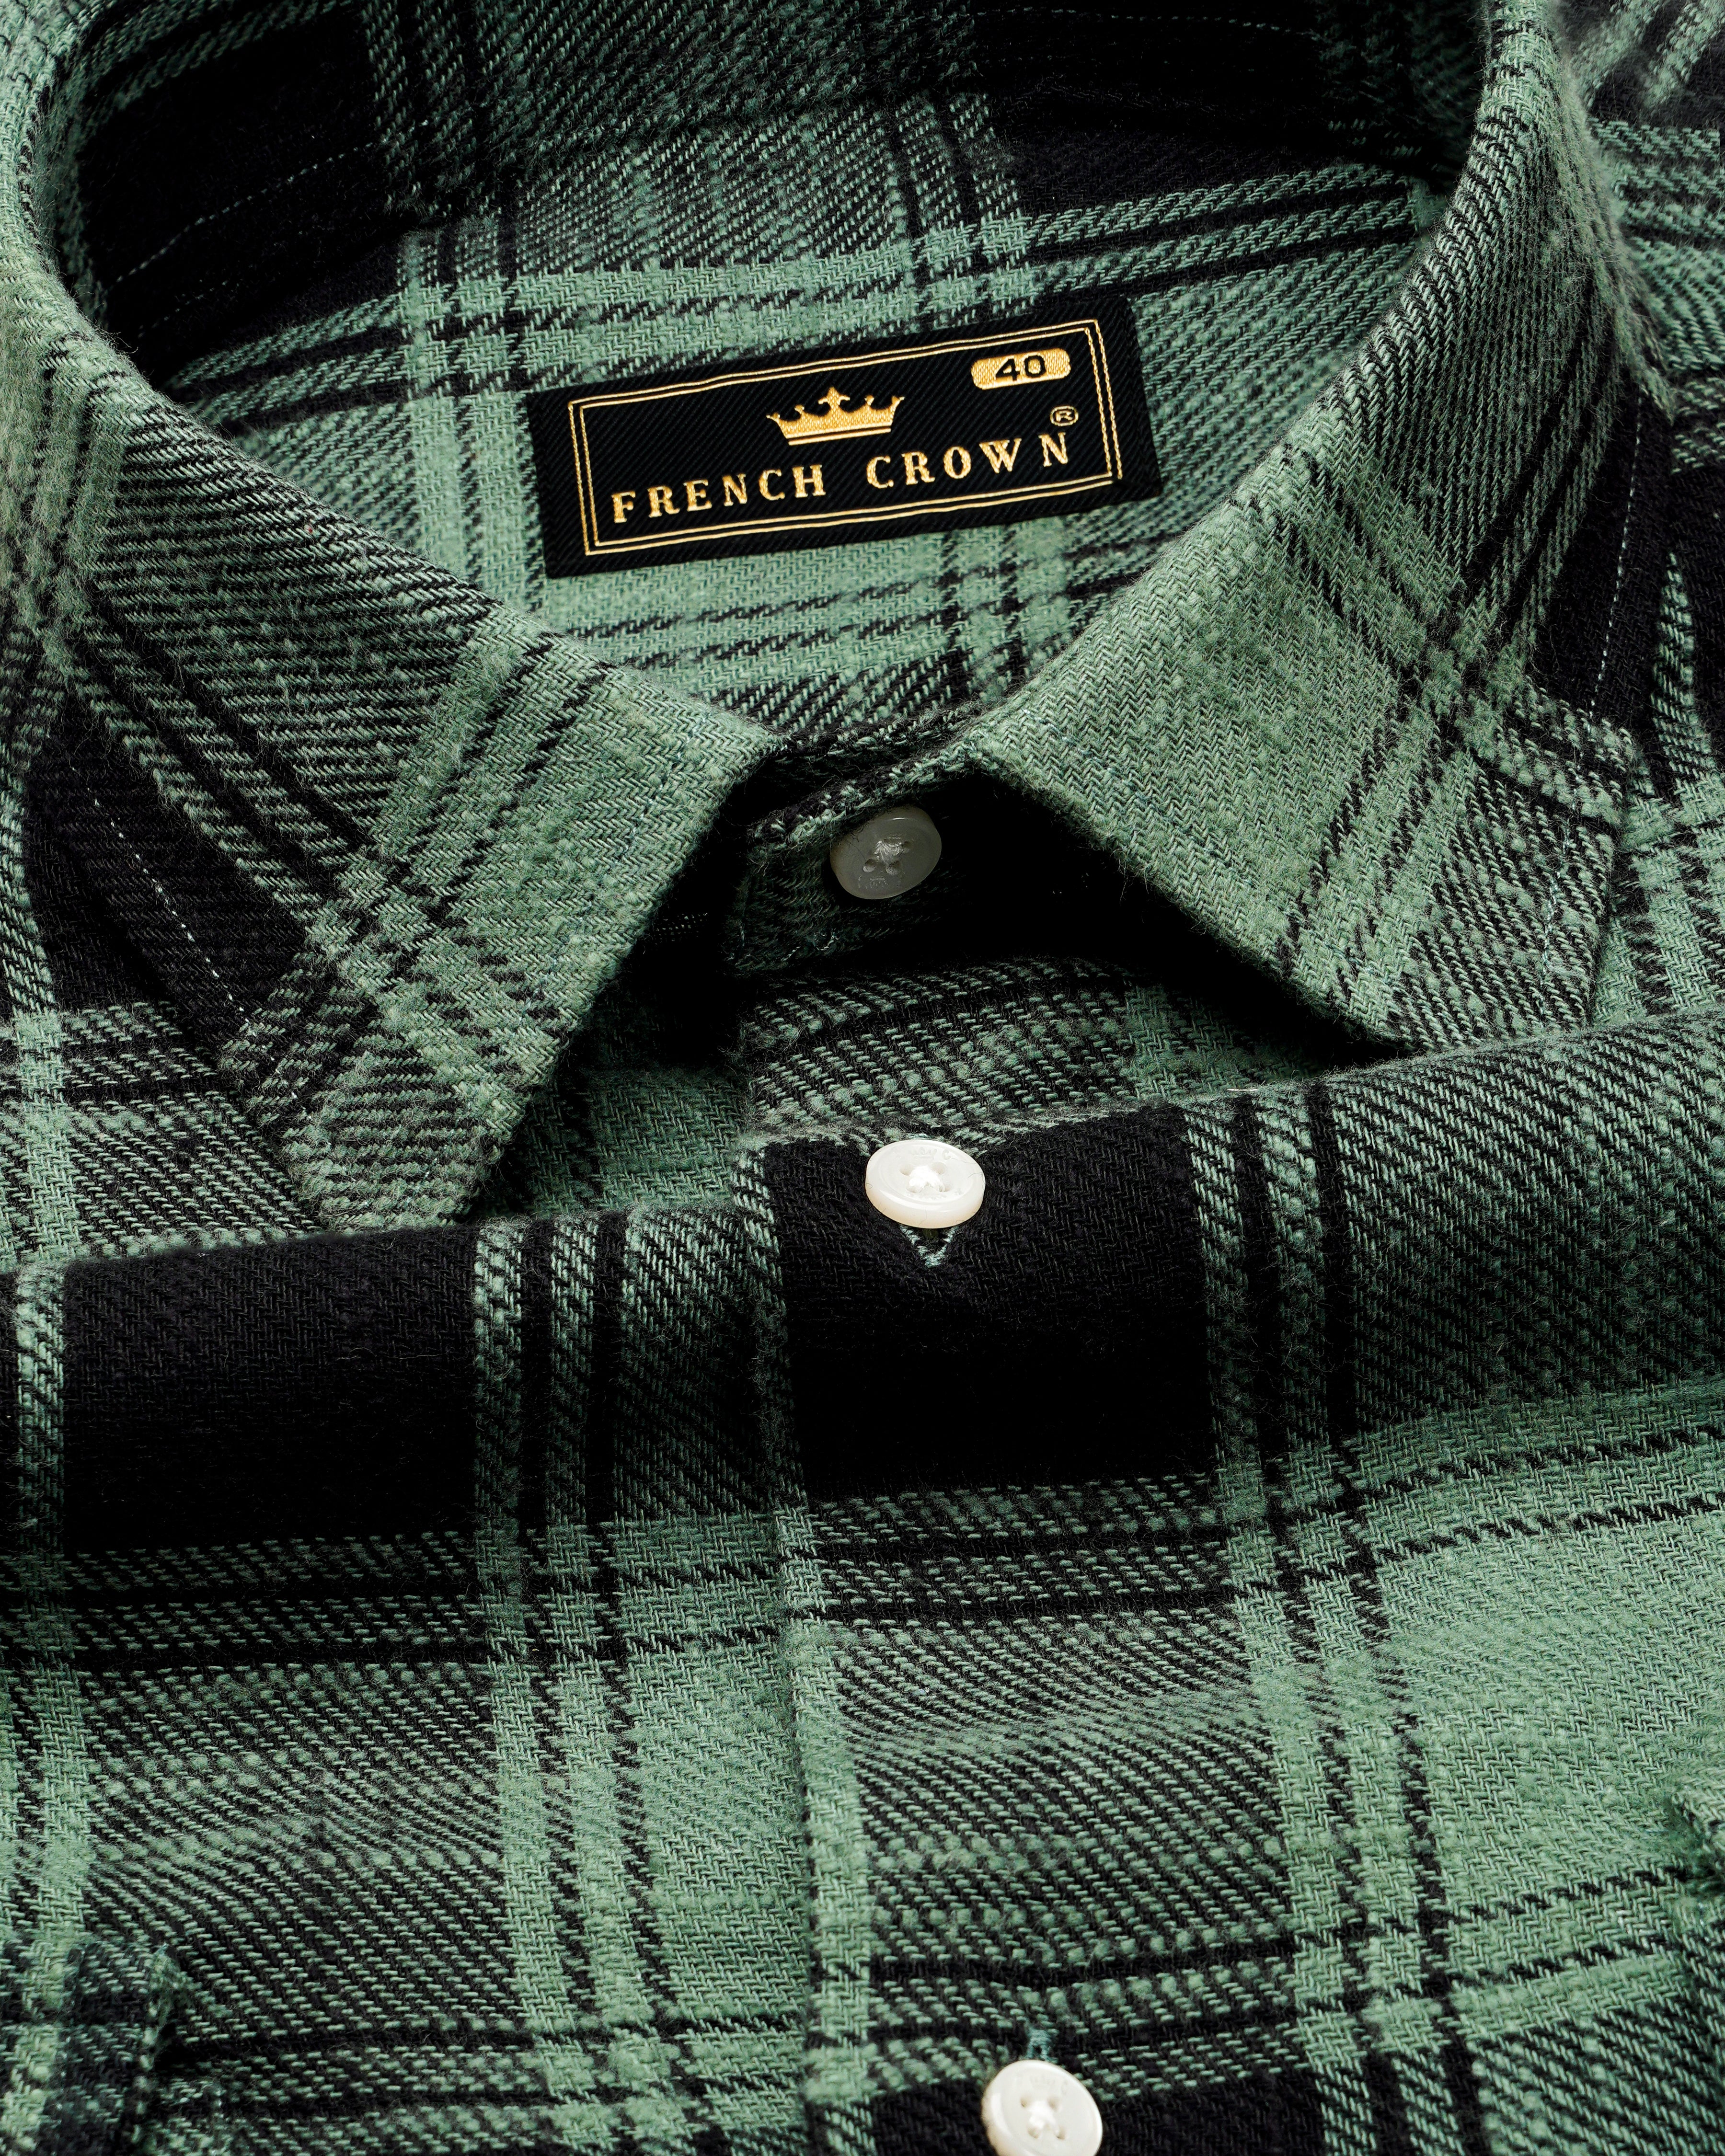 Oxley Green and Black Plaid Flannel Overshirt/Shacket 9883-OS-FP-38, 9883-OS-FP-H-38, 9883-OS-FP-39, 9883-OS-FP-H-39, 9883-OS-FP-40, 9883-OS-FP-H-40, 9883-OS-FP-42, 9883-OS-FP-H-42, 9883-OS-FP-44, 9883-OS-FP-H-44, 9883-OS-FP-46, 9883-OS-FP-H-46, 9883-OS-FP-48, 9883-OS-FP-H-48, 9883-OS-FP-50, 9883-OS-FP-H-50, 9883-OS-FP-52, 9883-OS-FP-H-52